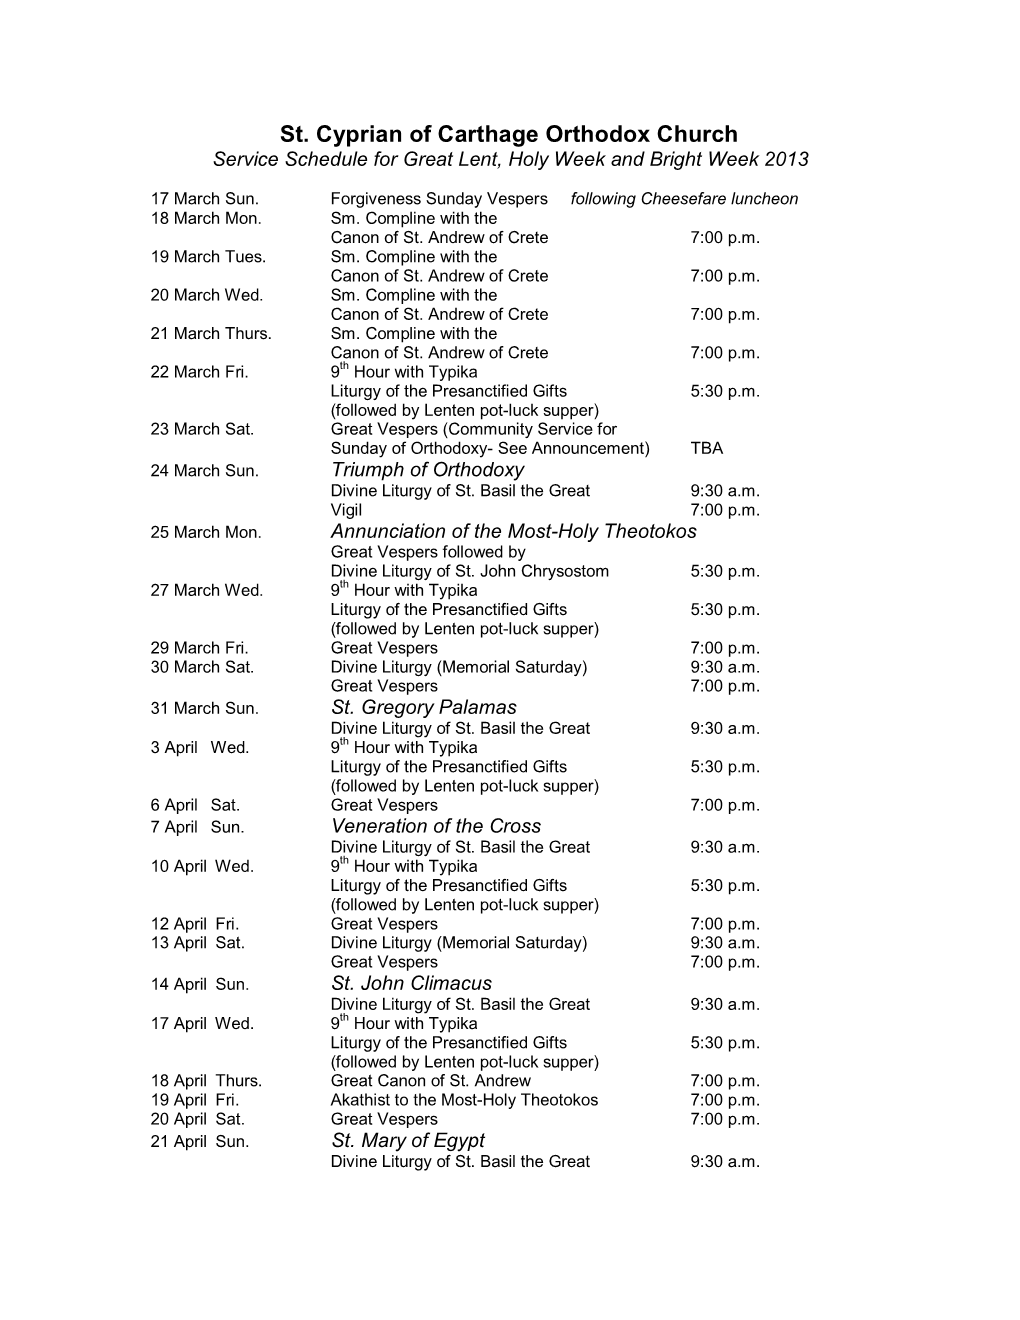 St. Cyprian of Carthage Orthodox Church Service Schedule for Great Lent, Holy Week and Bright Week 2013